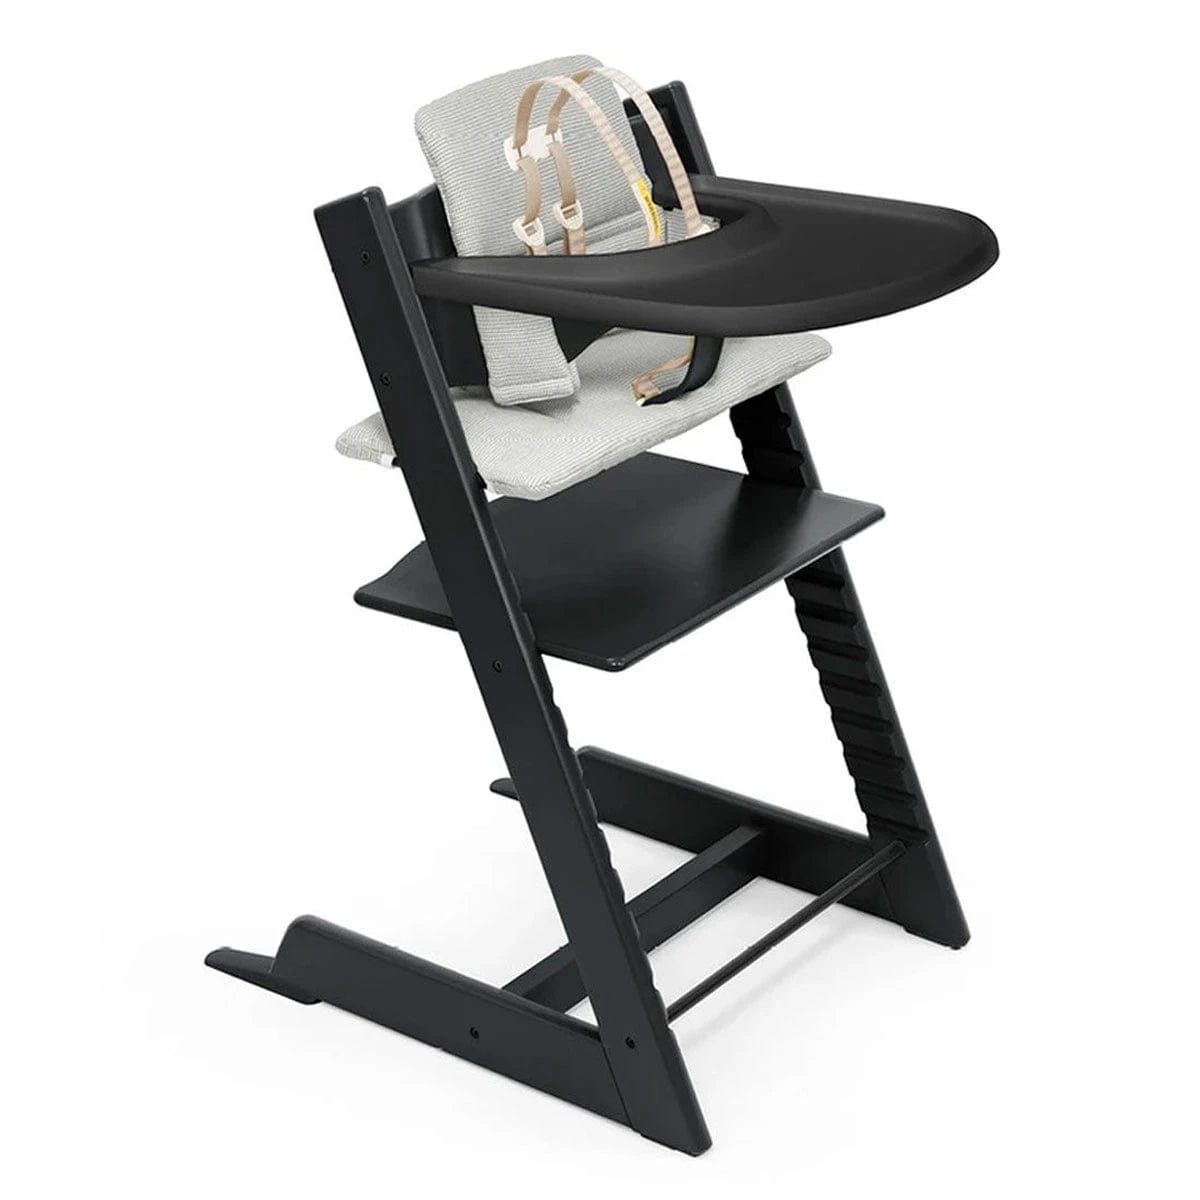 Stokke High Chairs & Booster Seats Black / Nordic Grey Cushion Stokke Tripp Trapp® High Chair and Cushion with Stokke® Tray